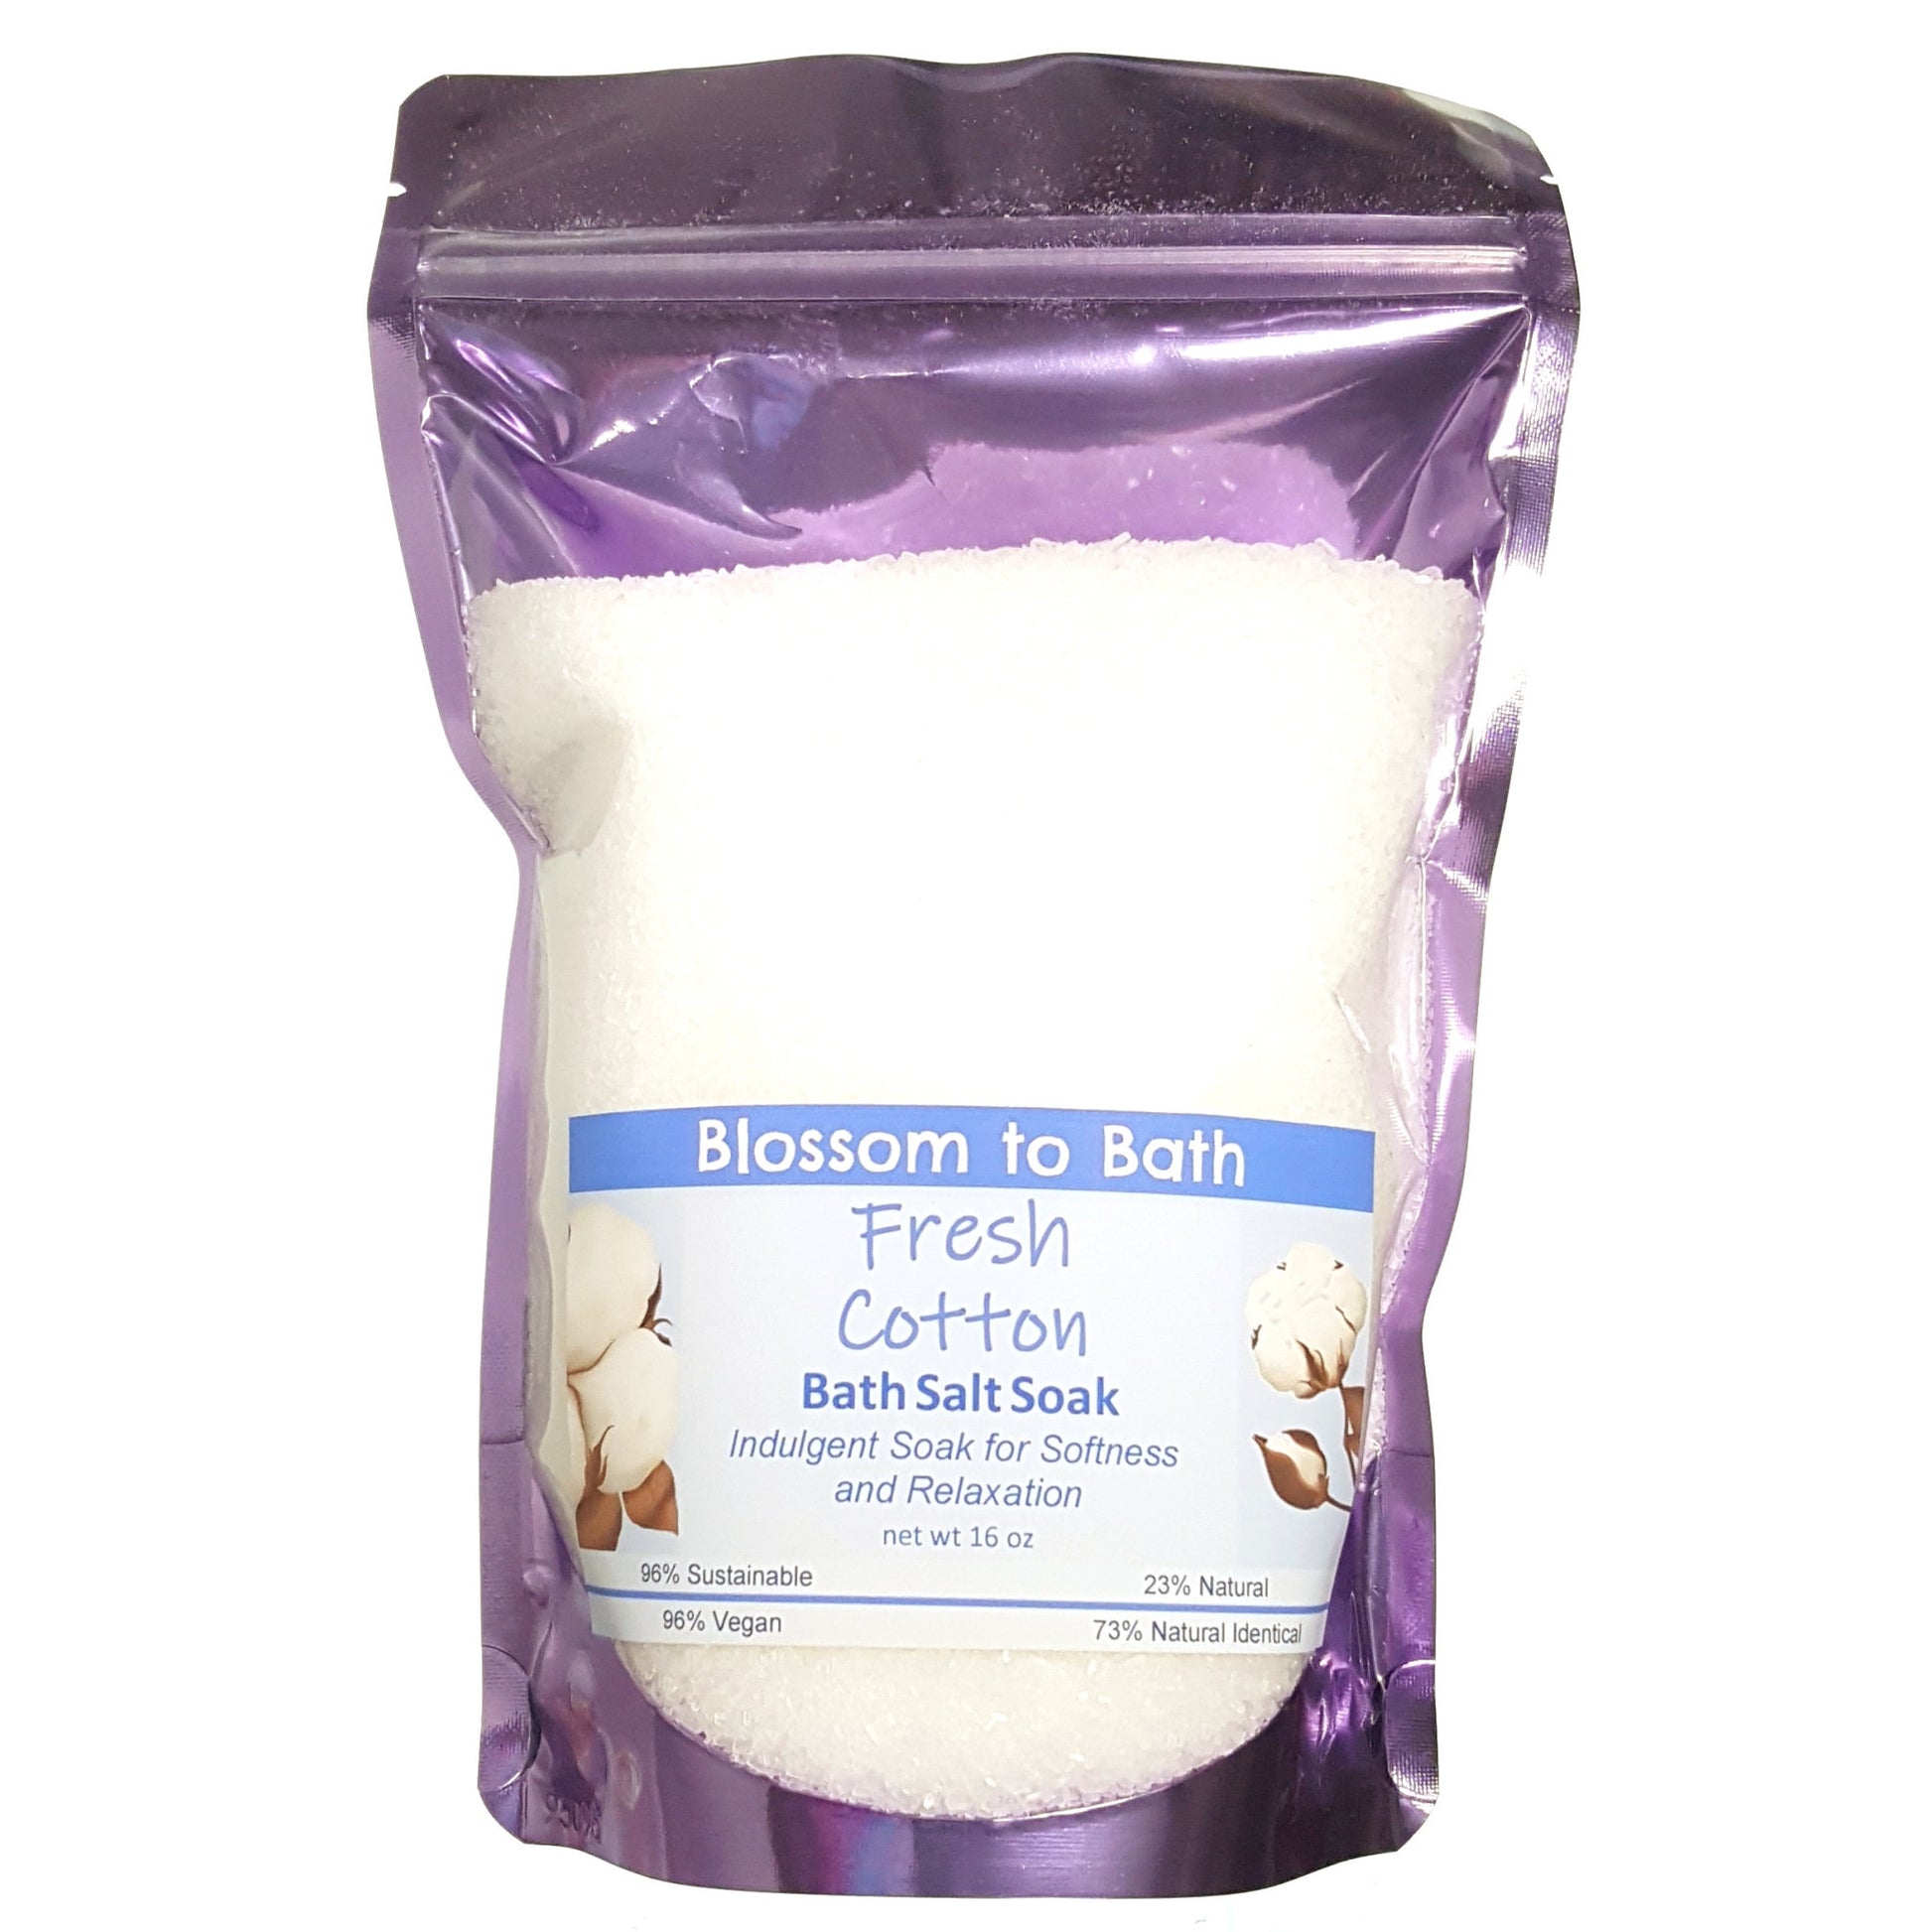 Buy Blossom to Bath Fresh Cotton Bath Salt Soak from Flowersong Soap Studio.  Scented epsom salts for a luxurious soaking experience  Smells like clean sheets drying in a breeze of spring blossoms.